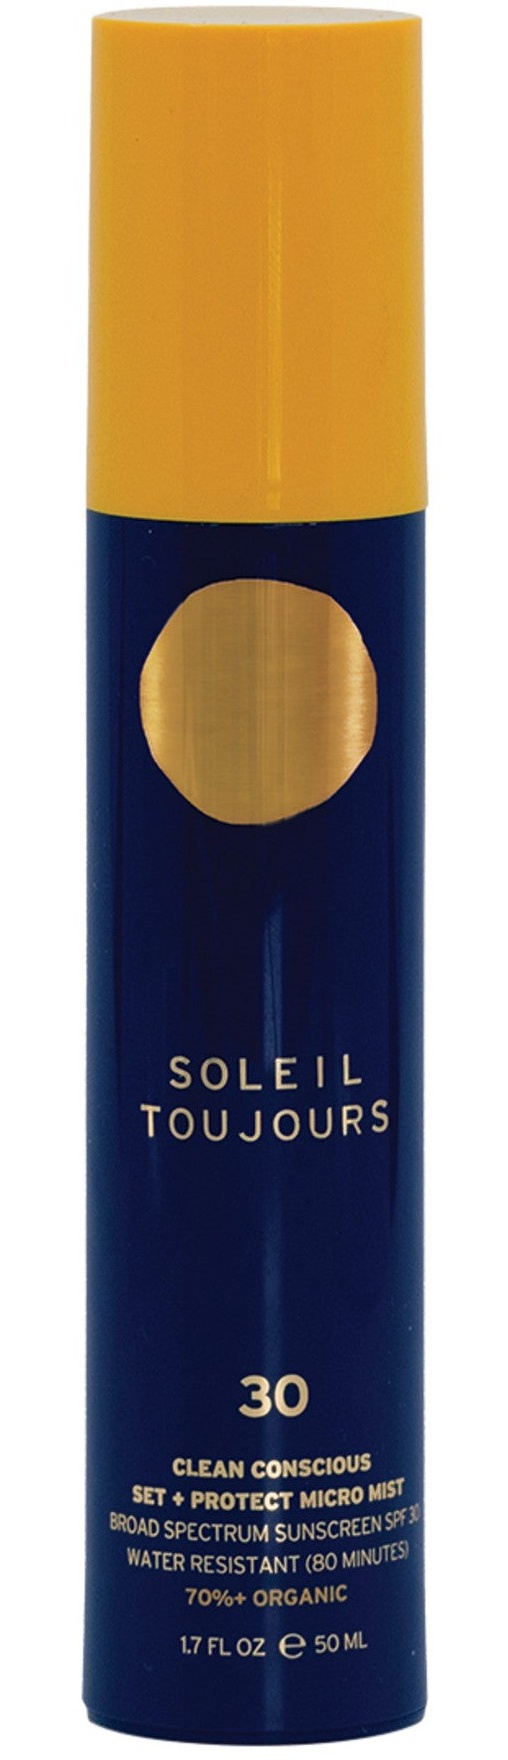 Soleil Toujours Clean Conscious Set + Protect Micro Mist Sunscreen SPF 30